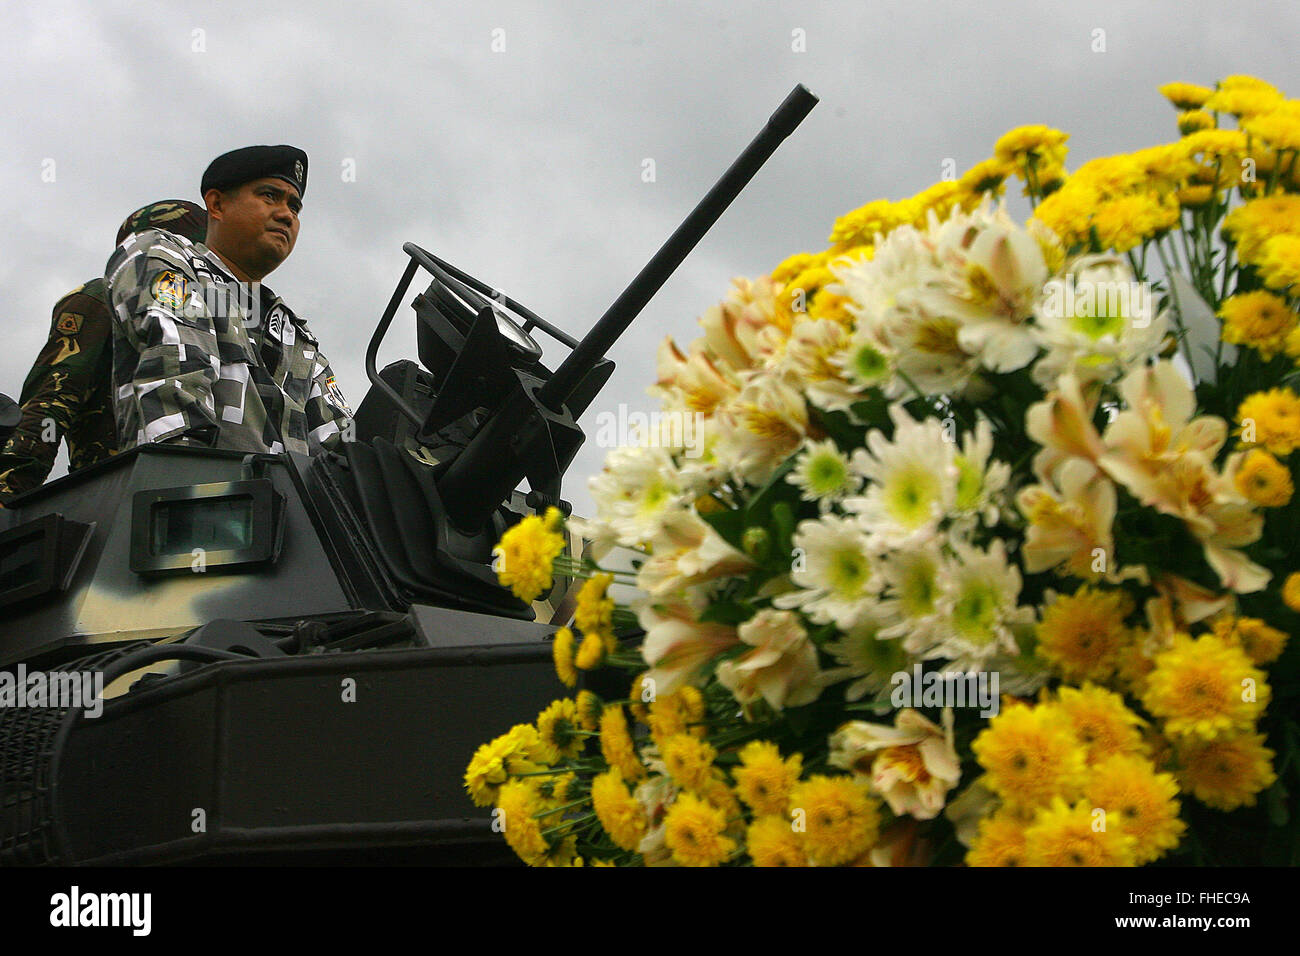 Quezon City, Philippines. 25th Feb, 2016. Soldiers on a tank participate in the 30th anniversary of the People Power Revolution in Quezon City, the Philippines, Feb. 25, 2016. Filipinos on Thursday celebrated the 30th anniversary of the People Power Revolution, an event that toppled the dictatorship of former President Ferdinand Marcos in 1986. Credit:  Rouelle Umali/Xinhua/Alamy Live News Stock Photo